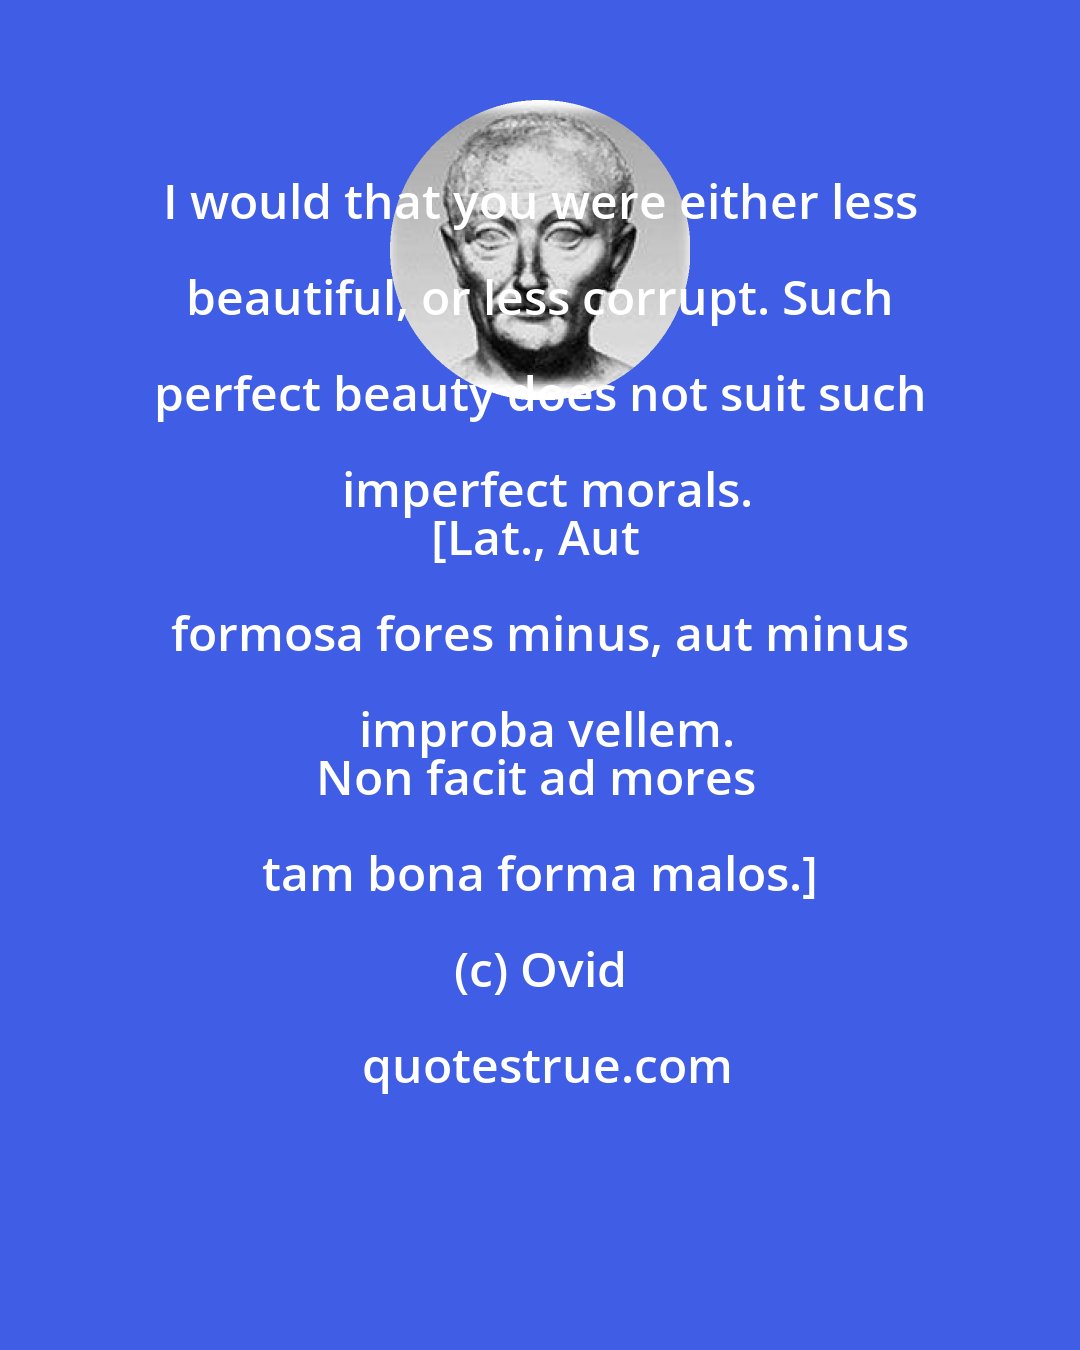 Ovid: I would that you were either less beautiful, or less corrupt. Such perfect beauty does not suit such imperfect morals.
[Lat., Aut formosa fores minus, aut minus improba vellem.
Non facit ad mores tam bona forma malos.]